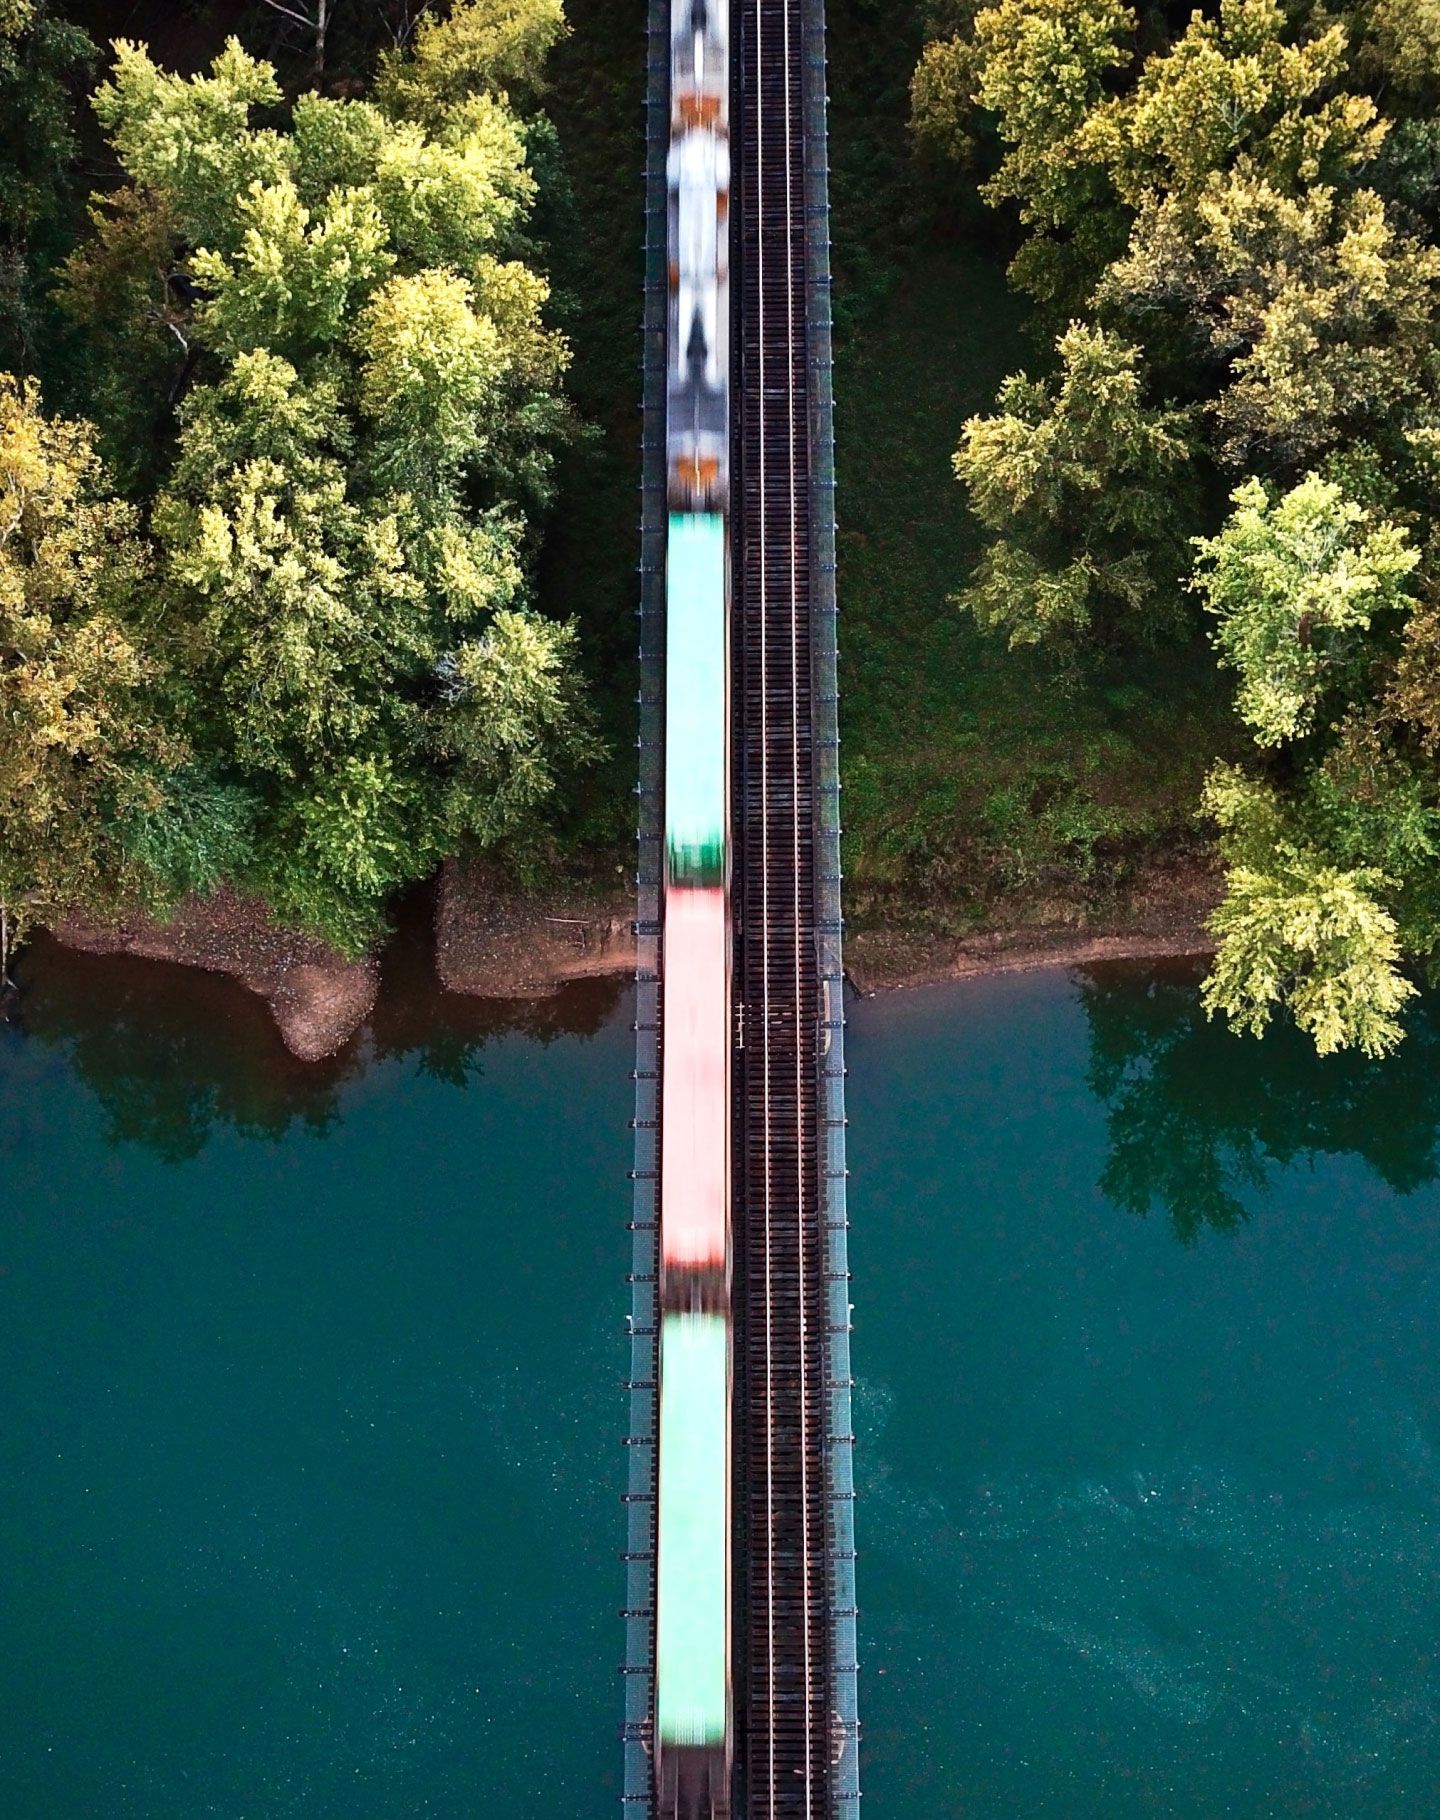 Train traveling over water and land. 